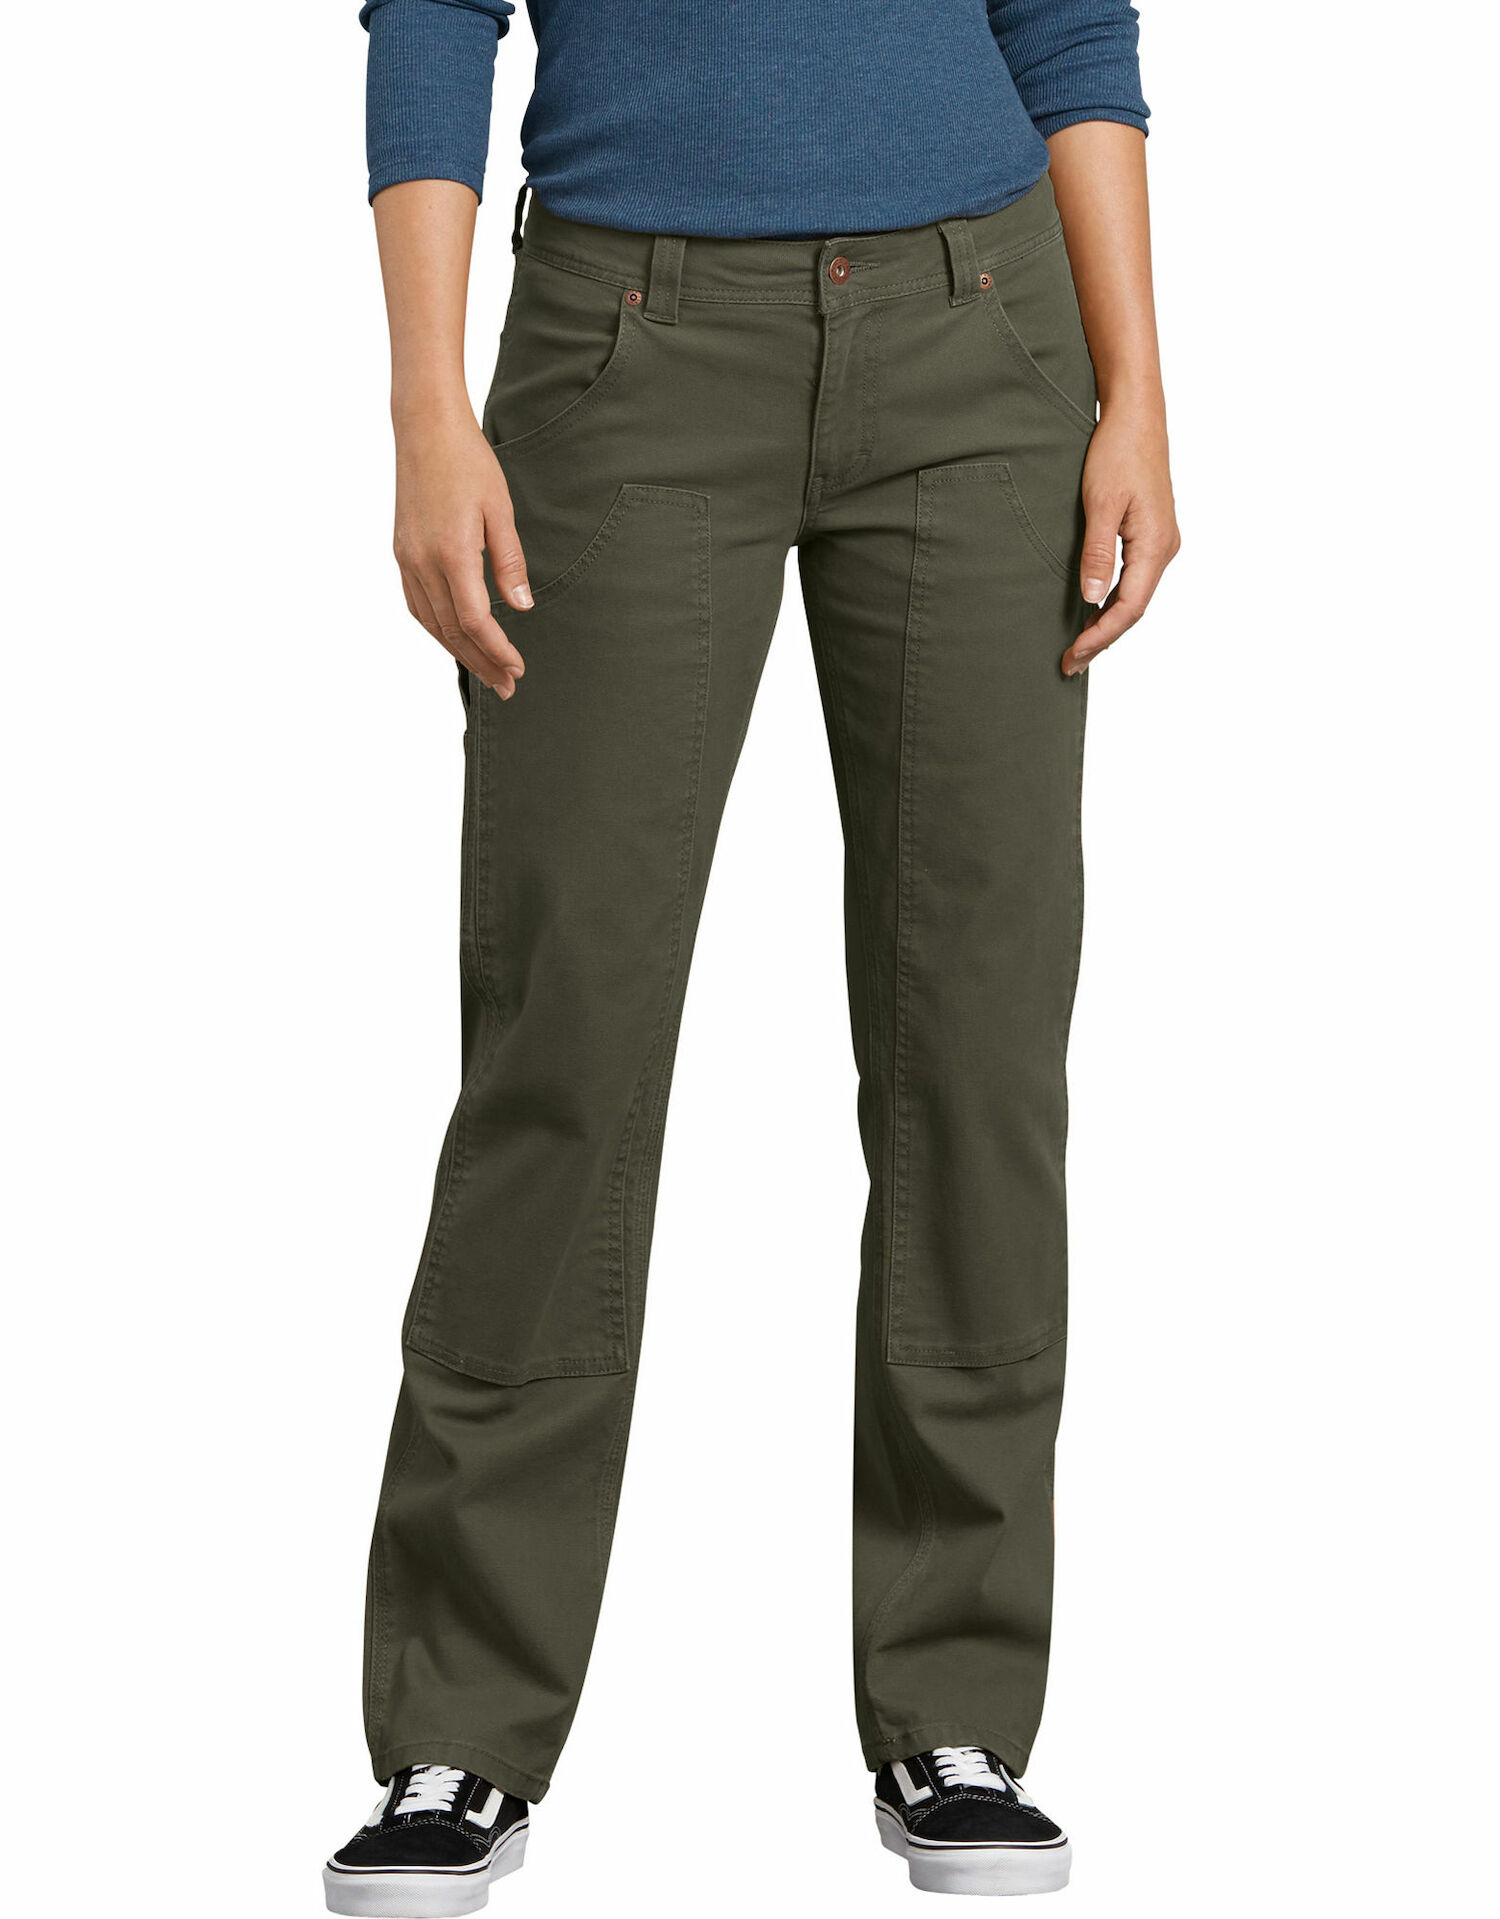 prAna Women's Contour Pants with Tall Inseam